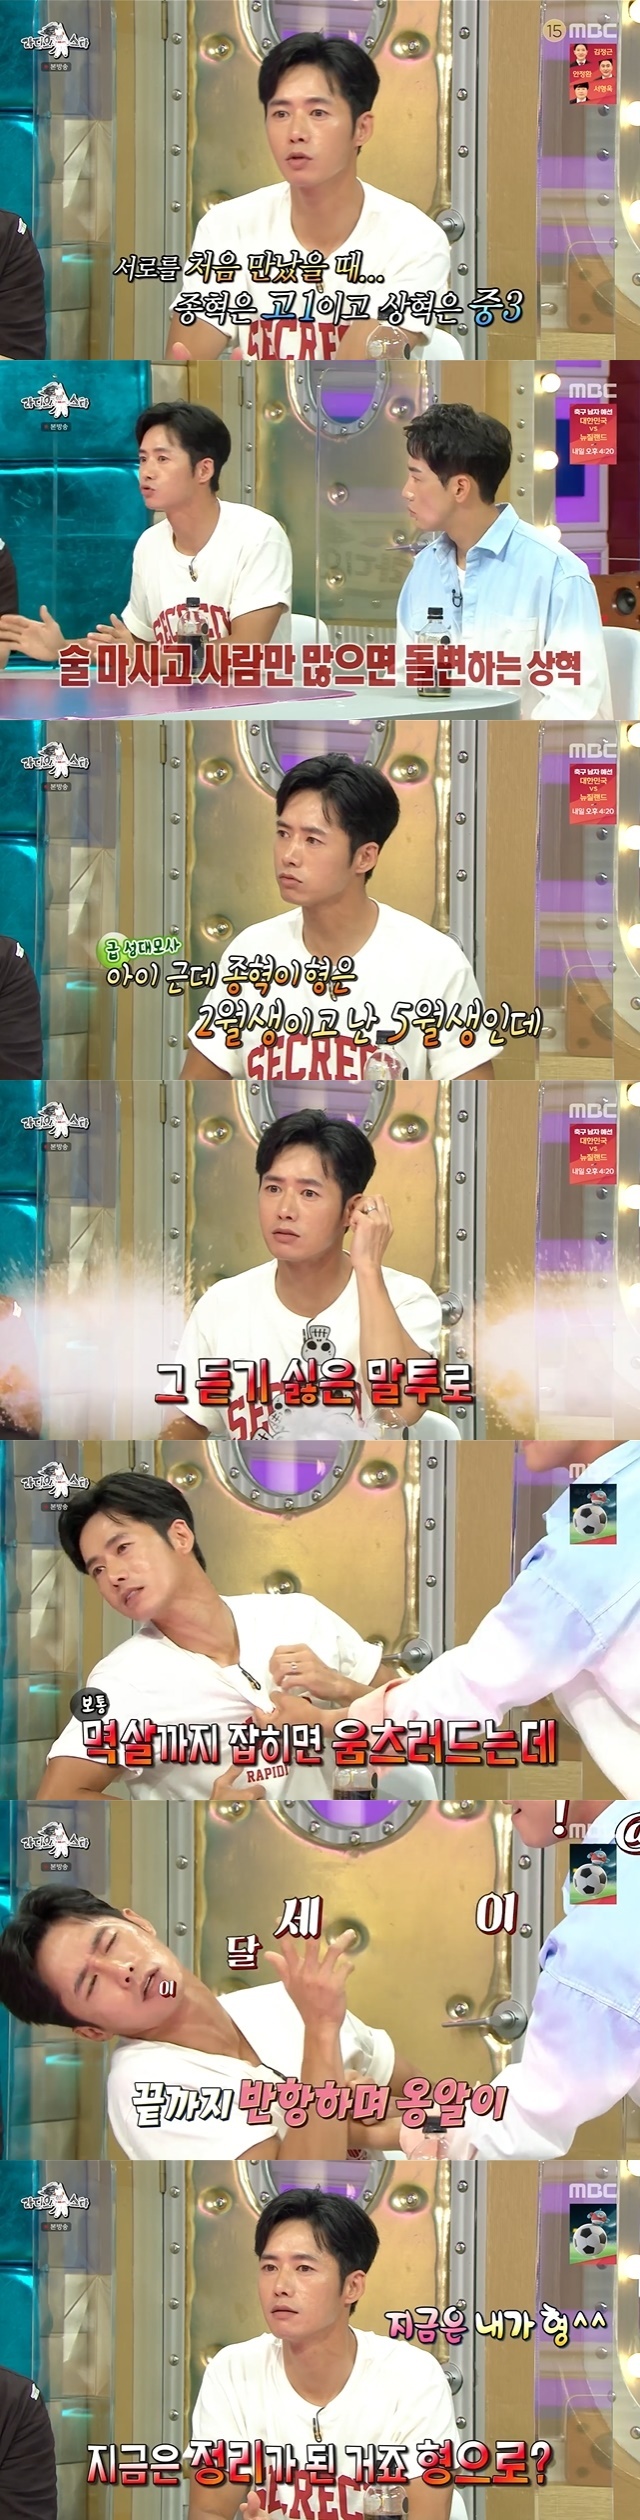 Oh Jong-hyuk has revealed Kim Sang-hyuk, who was working with the group Click-B.MBC entertainment program Radio Star broadcast on July 21st featured Steel Man special feature, Lim Chae Moo, Lee Jun Hyuk, Oh Jong-hyuk and Park Gun appeared as guests.On this day, Oh Jong-hyuk started a full-scale talk with the celebration of becoming a new groom.Oh Jong-hyuk, who had been delayed several times due to the Corona 19 city and had only marriage this year, was anxious from the beginning as he confused the specific marriage date.He remembered the date of April 18 in a sweat.Oh Jong-hyuk also revealed an anecdote that had suffered from Guan Wasa until recently.Channel A entertainment steel unit, City fisherman 3 shooting in marriage ceremony, musical activities overlap and Guan wasa came.I only believed in my physical strength and worked for three months, I had a heavy eye and a stiff headline. After the first performance, I moved two nights in City Fisher 3.(Fortunately, I found the hospital early) and stopped my mouth from turning; now Im 70 percent back, he explained.Oh Jong-hyuk is a new groom, so he also pointed out the regrets of his marriage with his wife.It is really good, he said a few times, and then he said, It is a problem to hang So and dog. He said he had learned to dog So in the army, and his wife said that So would be crumpled or not, At first I talked nicely, but then I was doing it again.I also talked to my wife, and my wifes expression ... I want to not talk about it again. I always get up four hours earlier than my wife and do all the good So in the morning. He also told an anecdote at the time of his activities as an idol group Click-B.In the past, I was on an outdoor special stage, but the manager said, I believe you. He jumped into the pond just before the live broadcast and ordered me to run to the camera.Oh Jong-hyuk jumped as the manager ordered, and performed with water, but he was saddened to say that he had compensated for a water-soaked microphone set for a few million won.Also on this day, Oh Jong-hyuk appeared in the last round of Kim Sang-hyuk and he responded sharply to what he said, Oh Jong-hyuk is a soldier image these days, and I used to beat my ass a lot.Oh Jong-hyuk said, Sang Hyuk was a friend who was fighting. I was born in February, and Sang Hyuk was in May.I met the friend in the third grade of junior high school when I was in the first grade of high school.But if this Friend drinks and there are a lot of people (change) suddenly, Oh, but Jonghyuk is a February student and I am a May student. This is the way I do not want to listen.The frequency is annoying when you listen. I was dragged into the bathroom a few times. My fists went up to this point. 